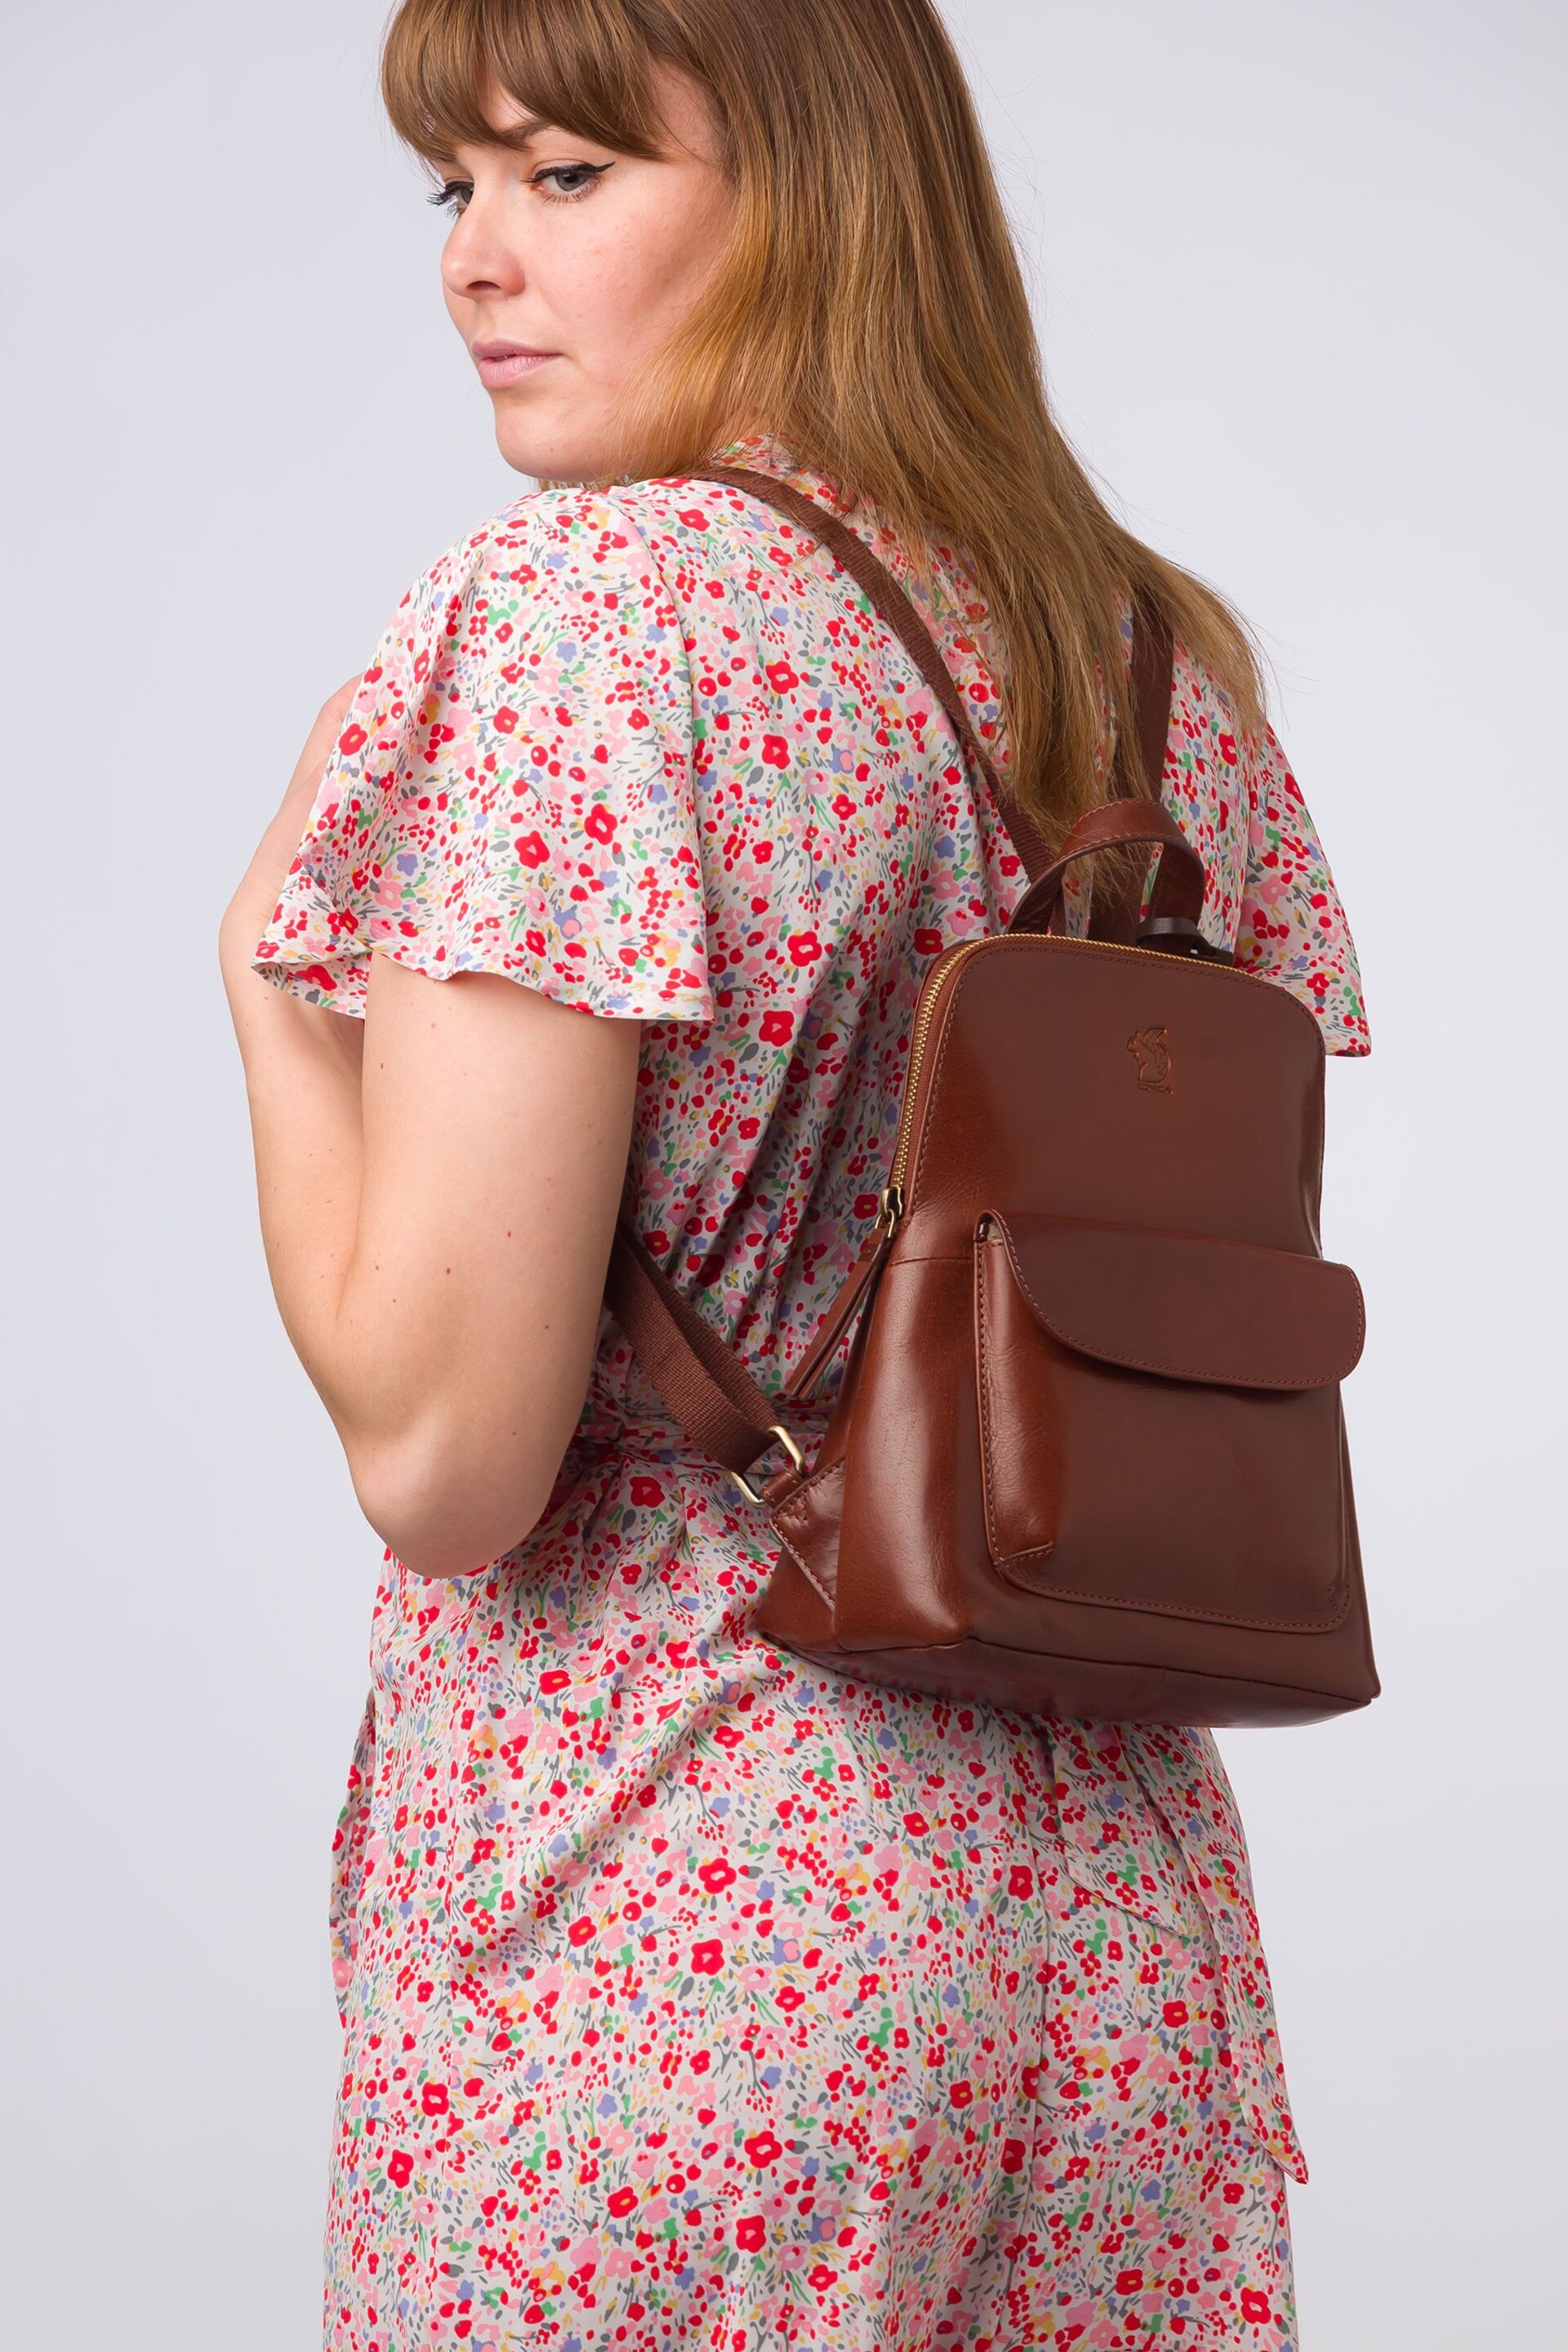 Conkca 'Kerrie' Leather Backpack - Image 1 of 7